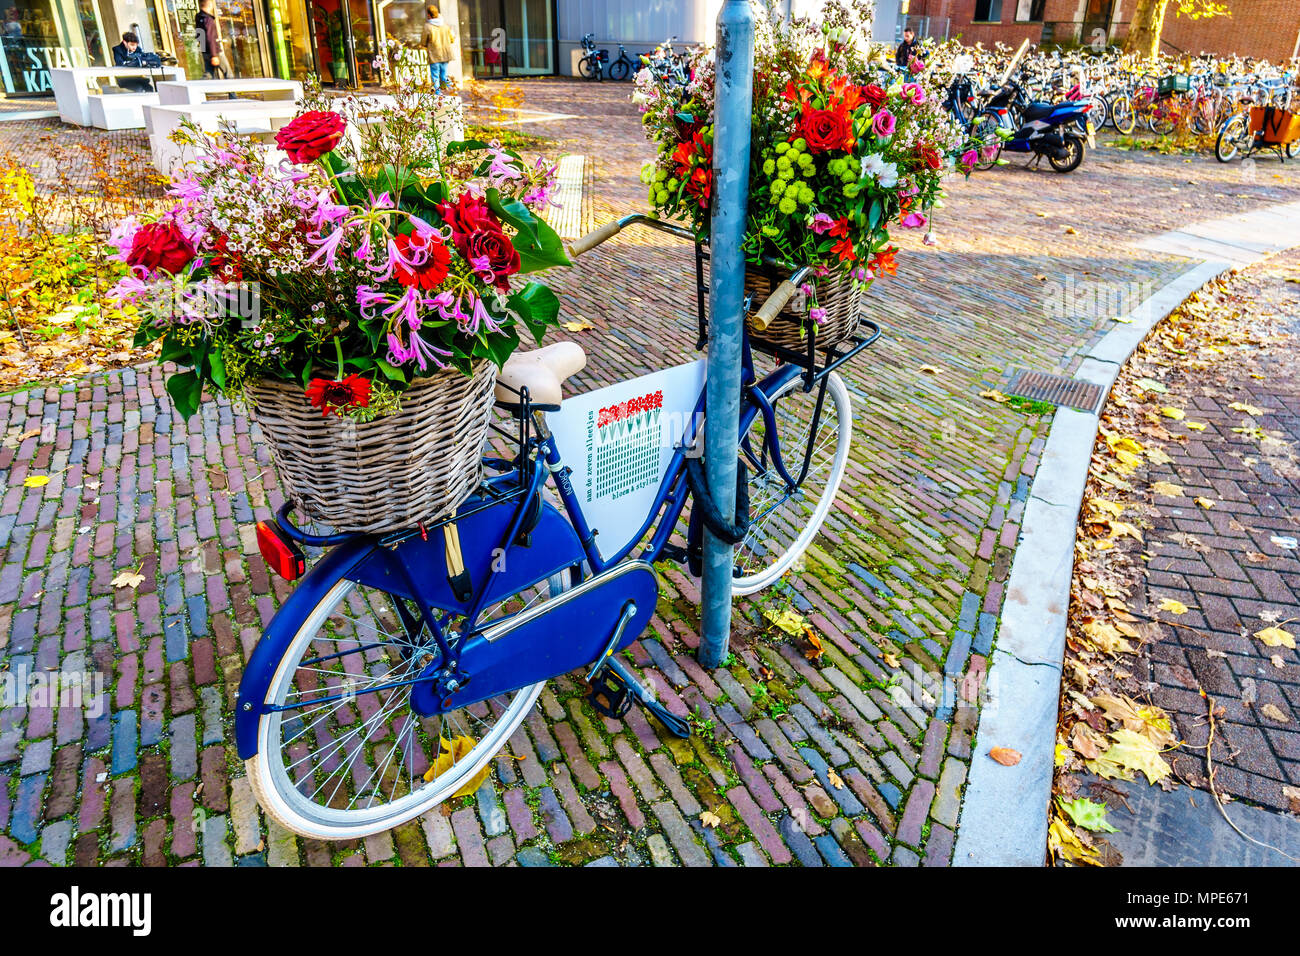 A typical Dutch tradition of a floral art display on an antique bike in the city center of Zwolle in the Netherlands Stock Photo